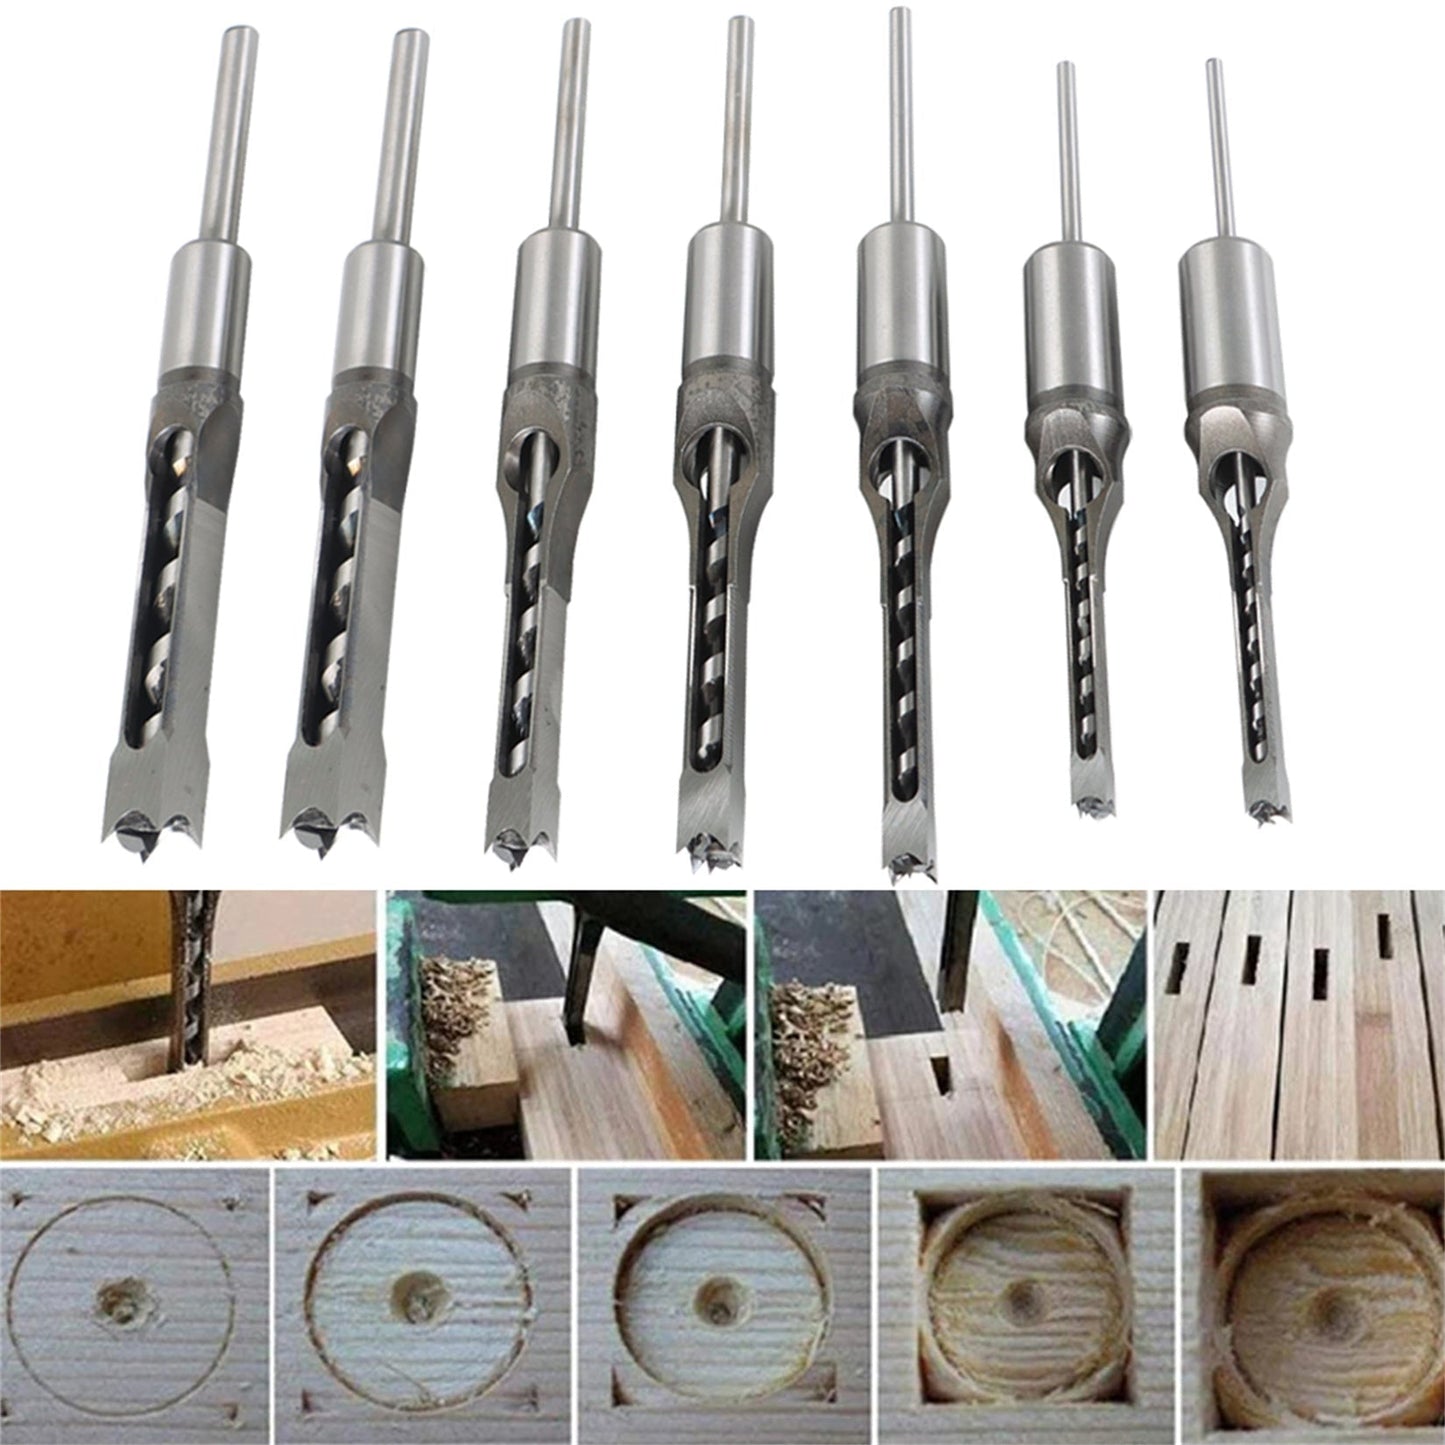 findmall  7Pcs Square Hole Drill Bit HSS Square Hole Saw Mortise Chisel Drill Bit Tools Wood Mortising Chisel Set Twist Drill Wood Hole Drilling Tool for Mortising Machines Drill Press Attachments FINDMALLPARTS